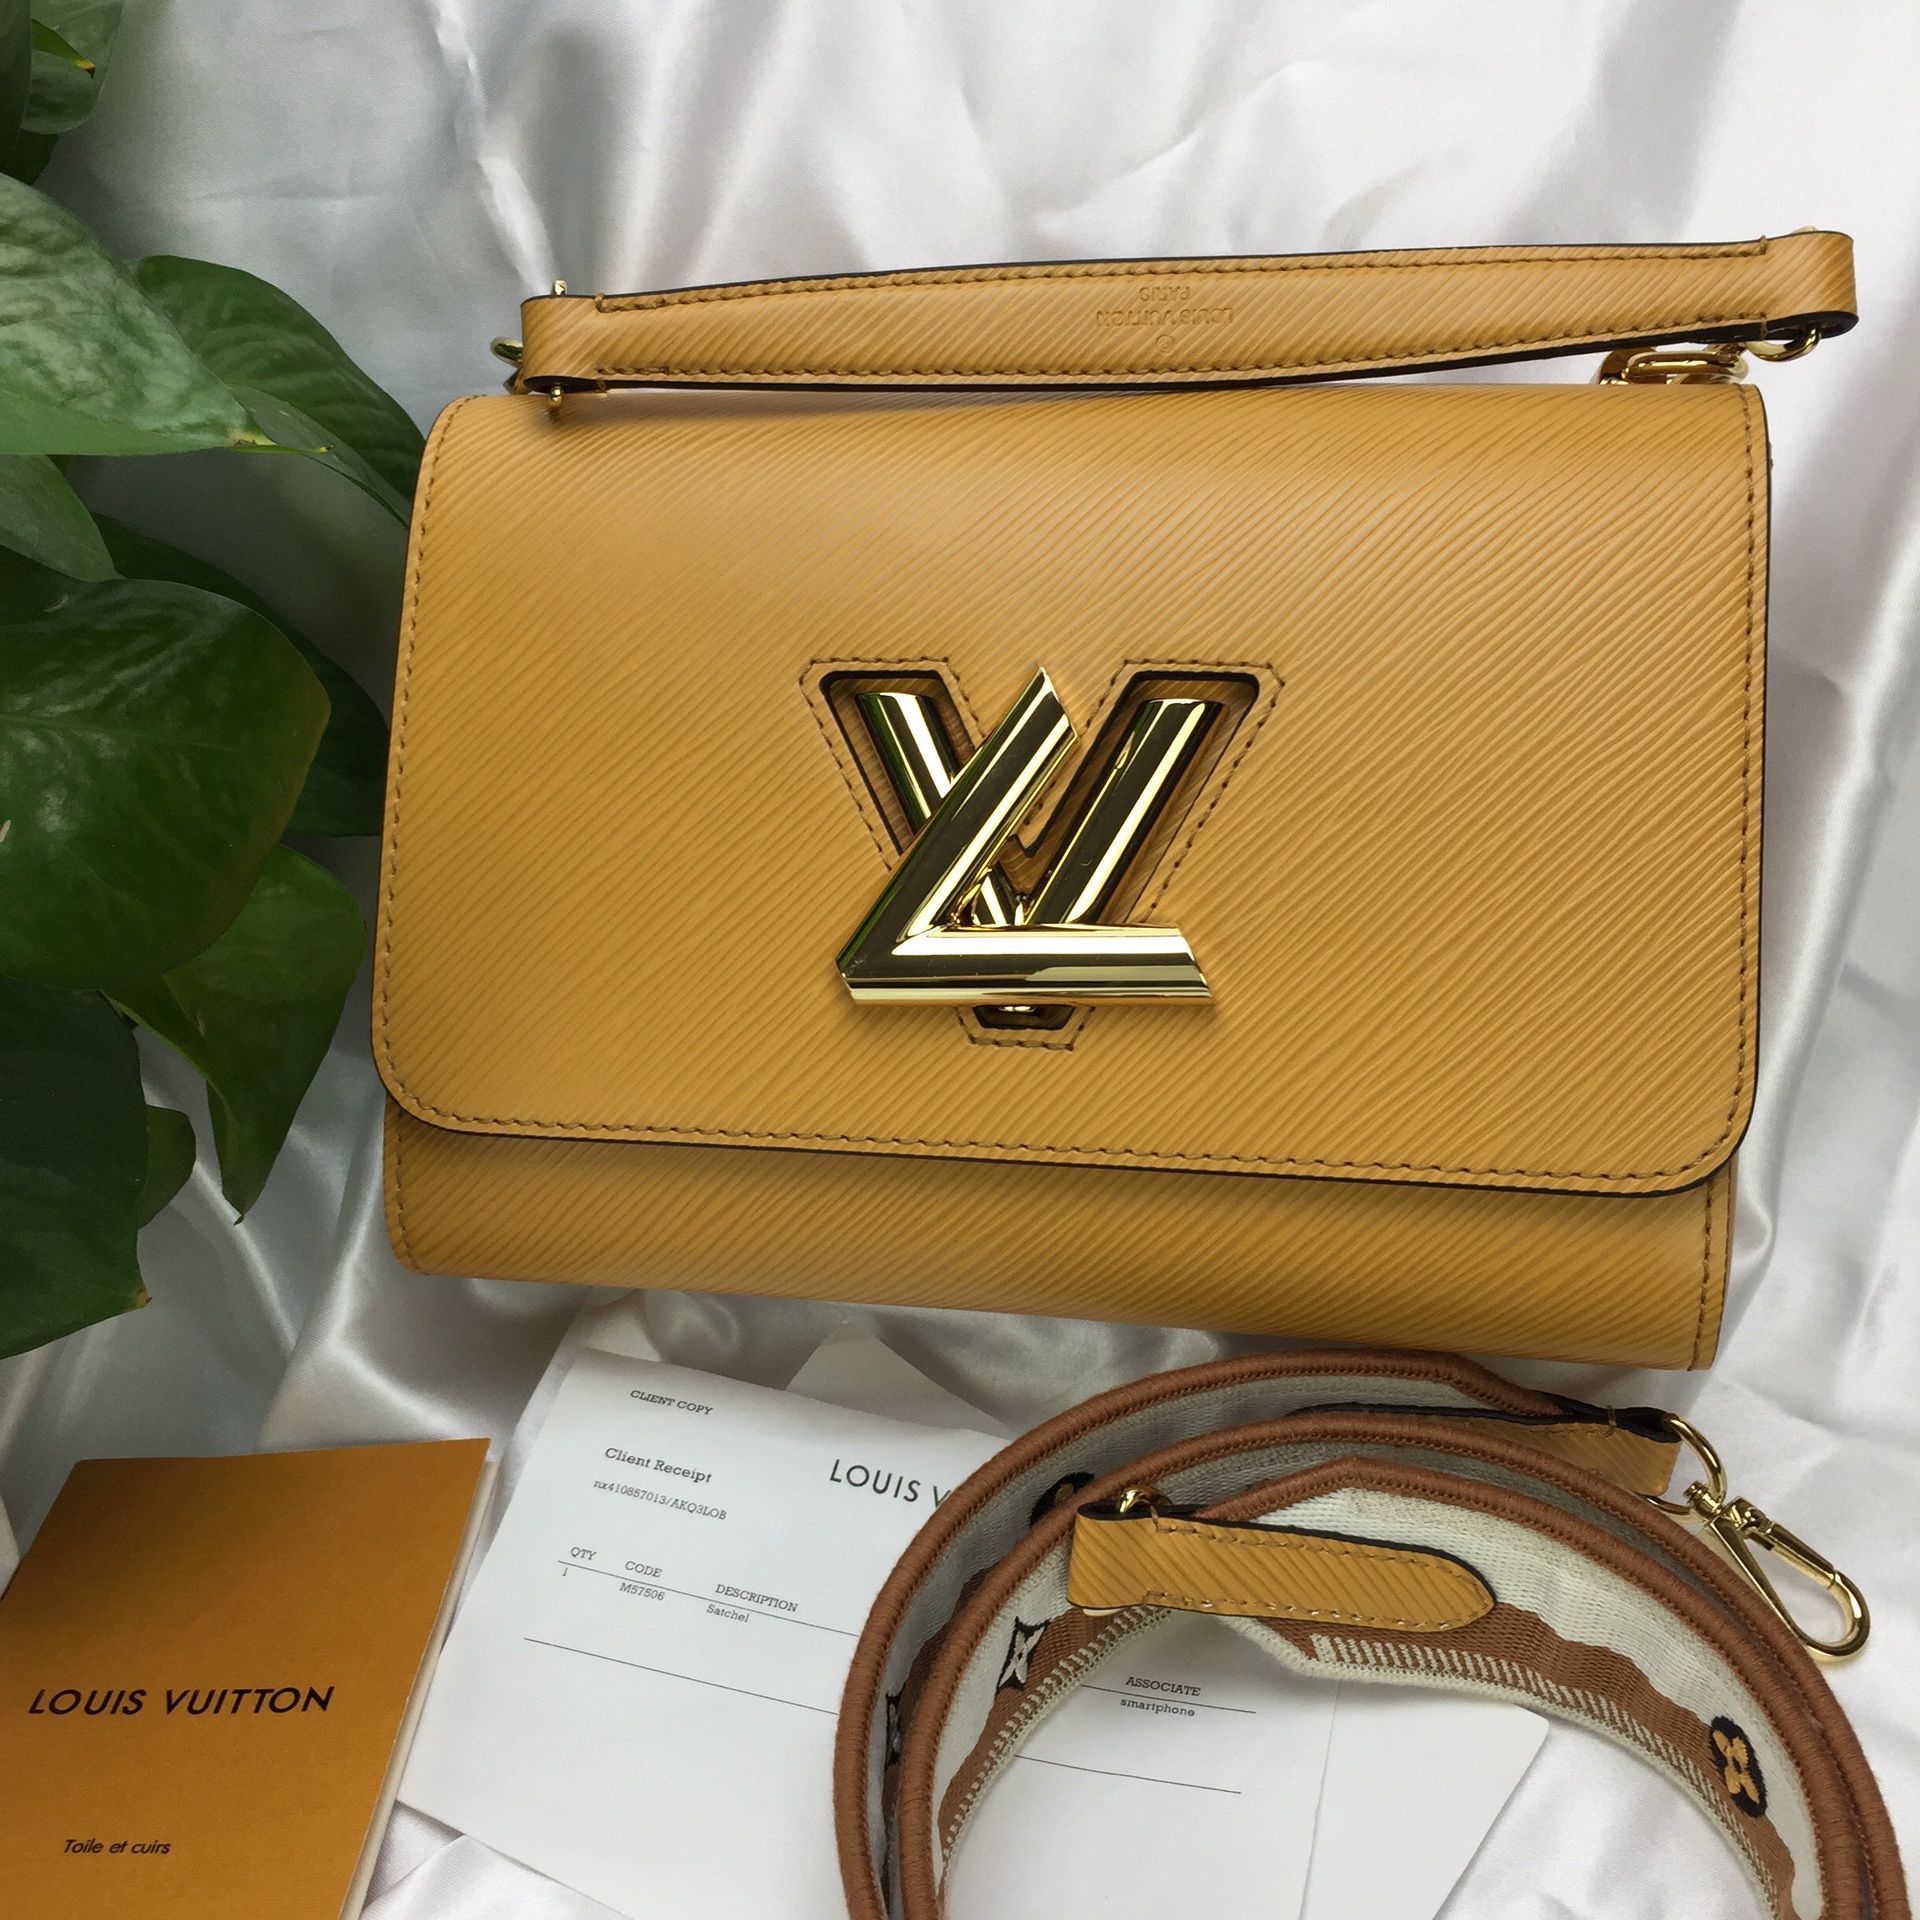 Louis Vuitton twist MM Rarely used  Used louis vuitton, Bags, Louis vuitton